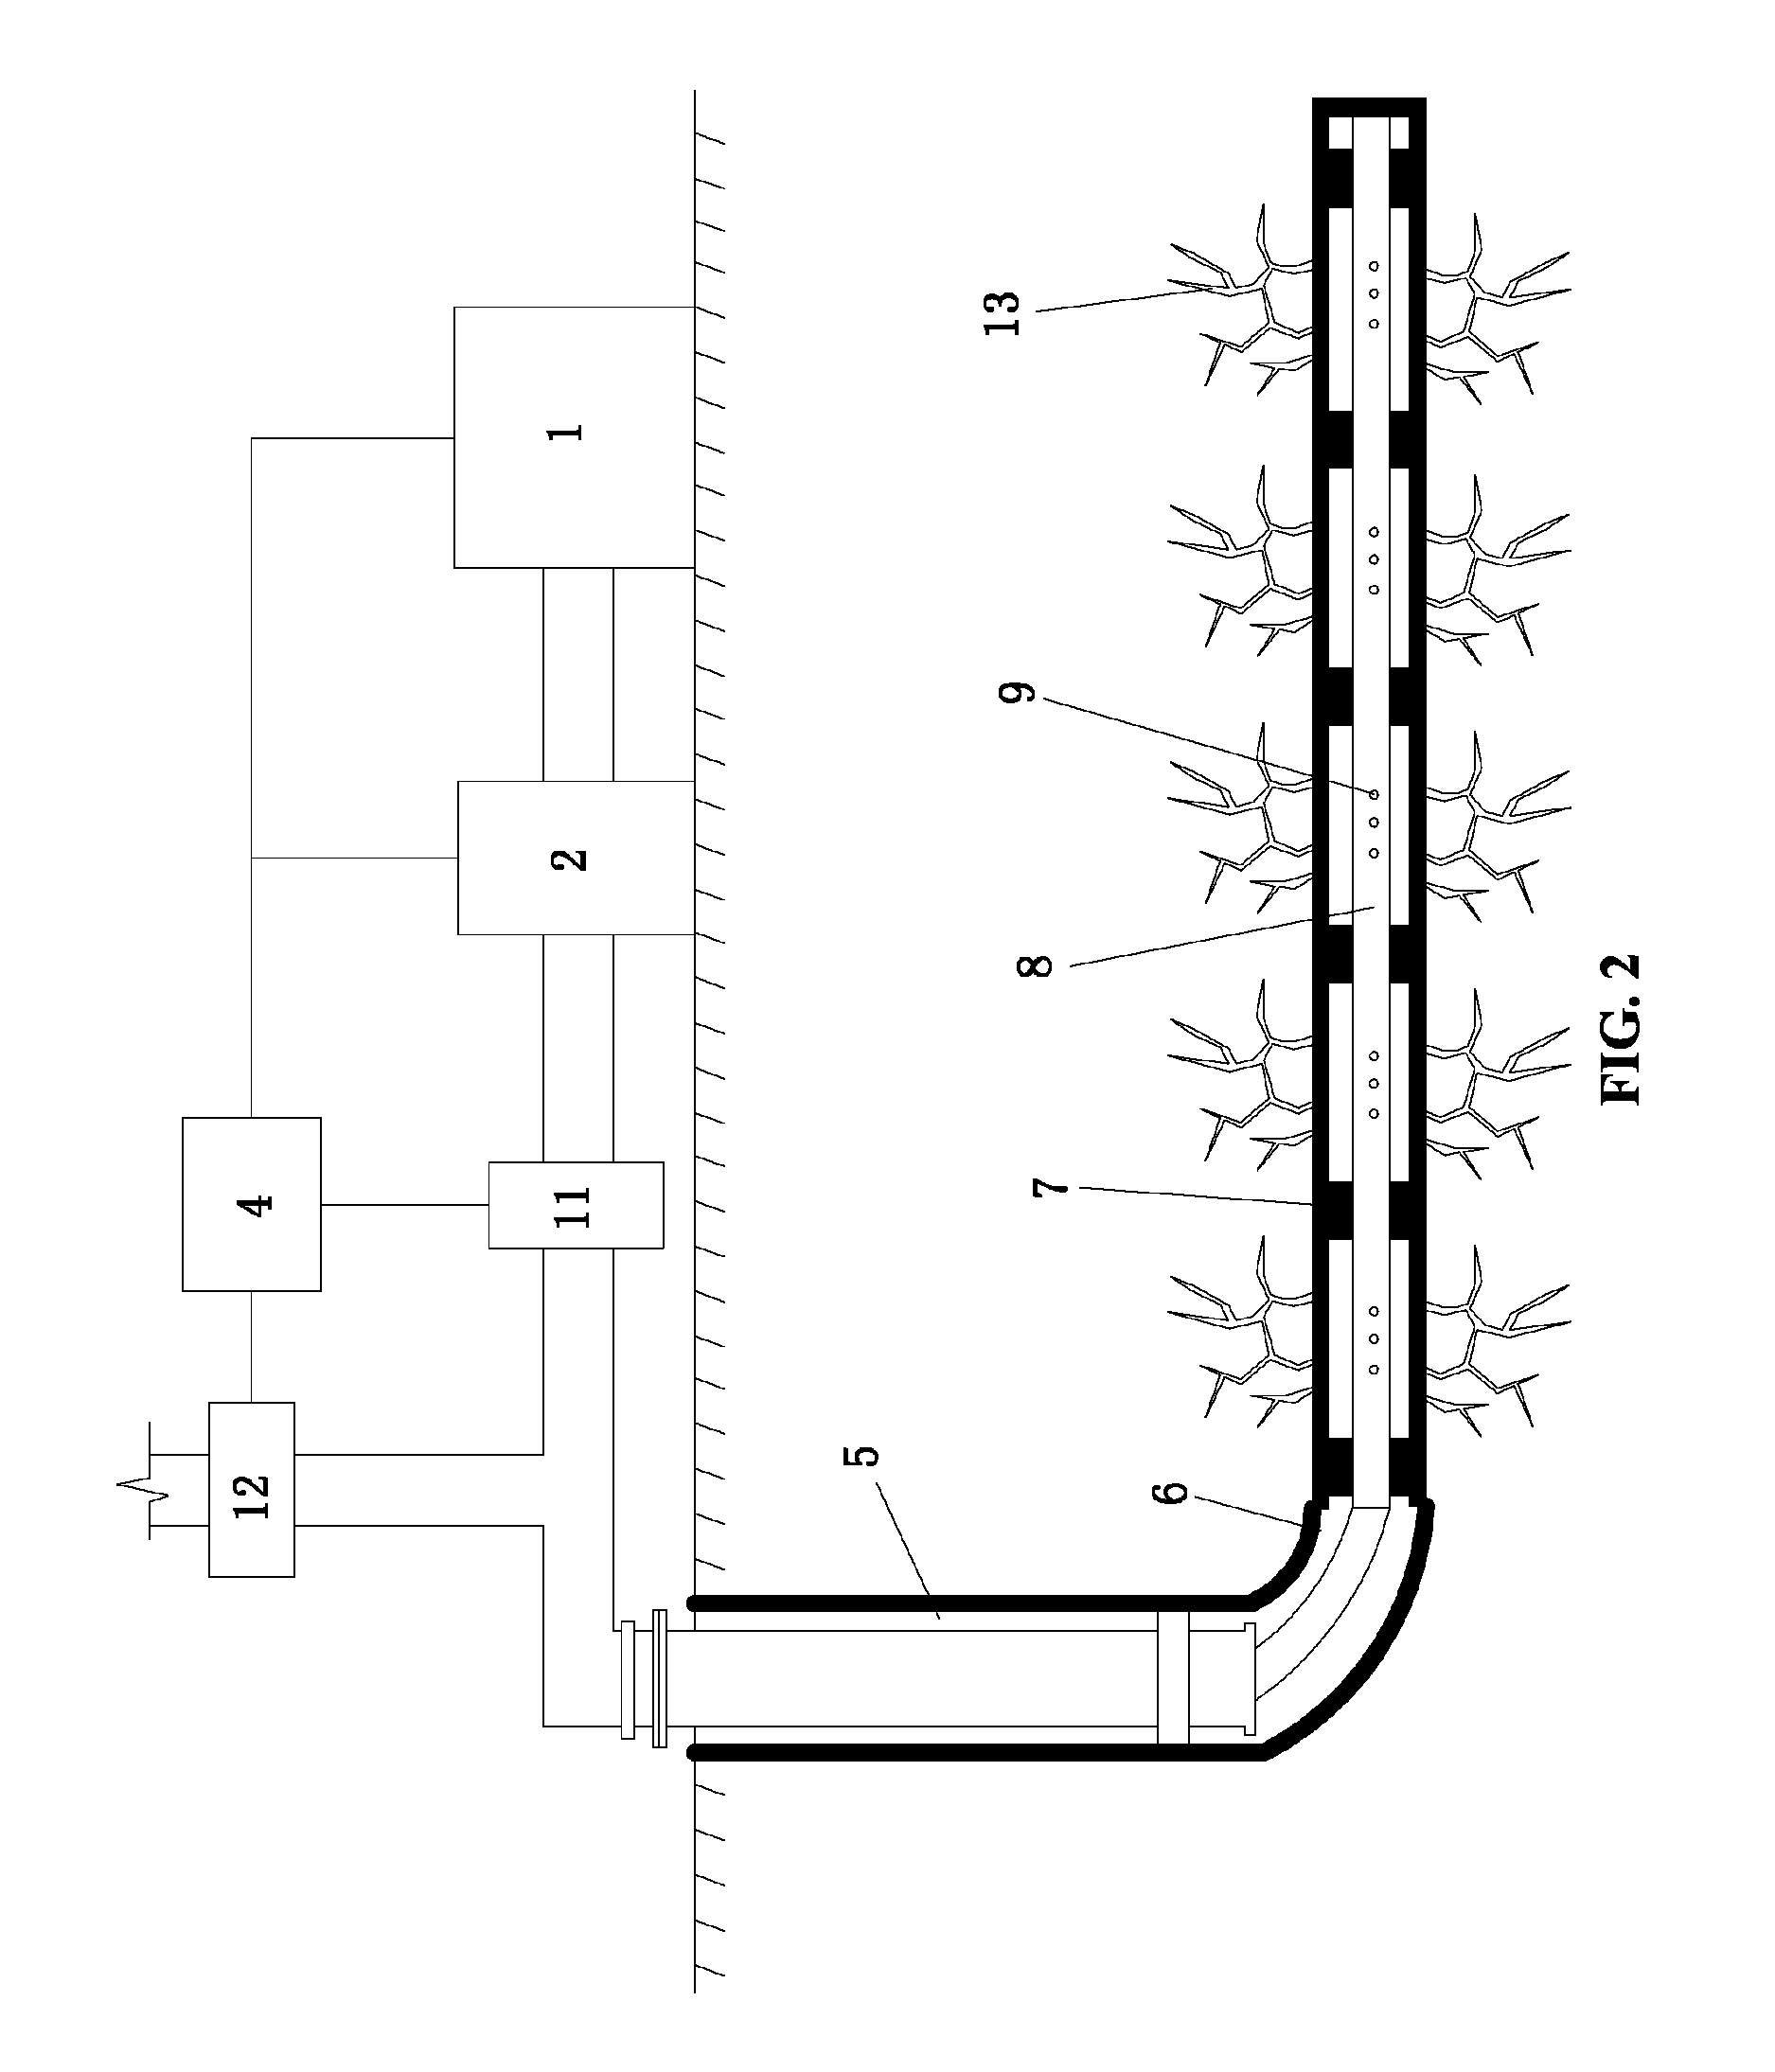 Pneumatic fracturing method and system for exploiting shale gas